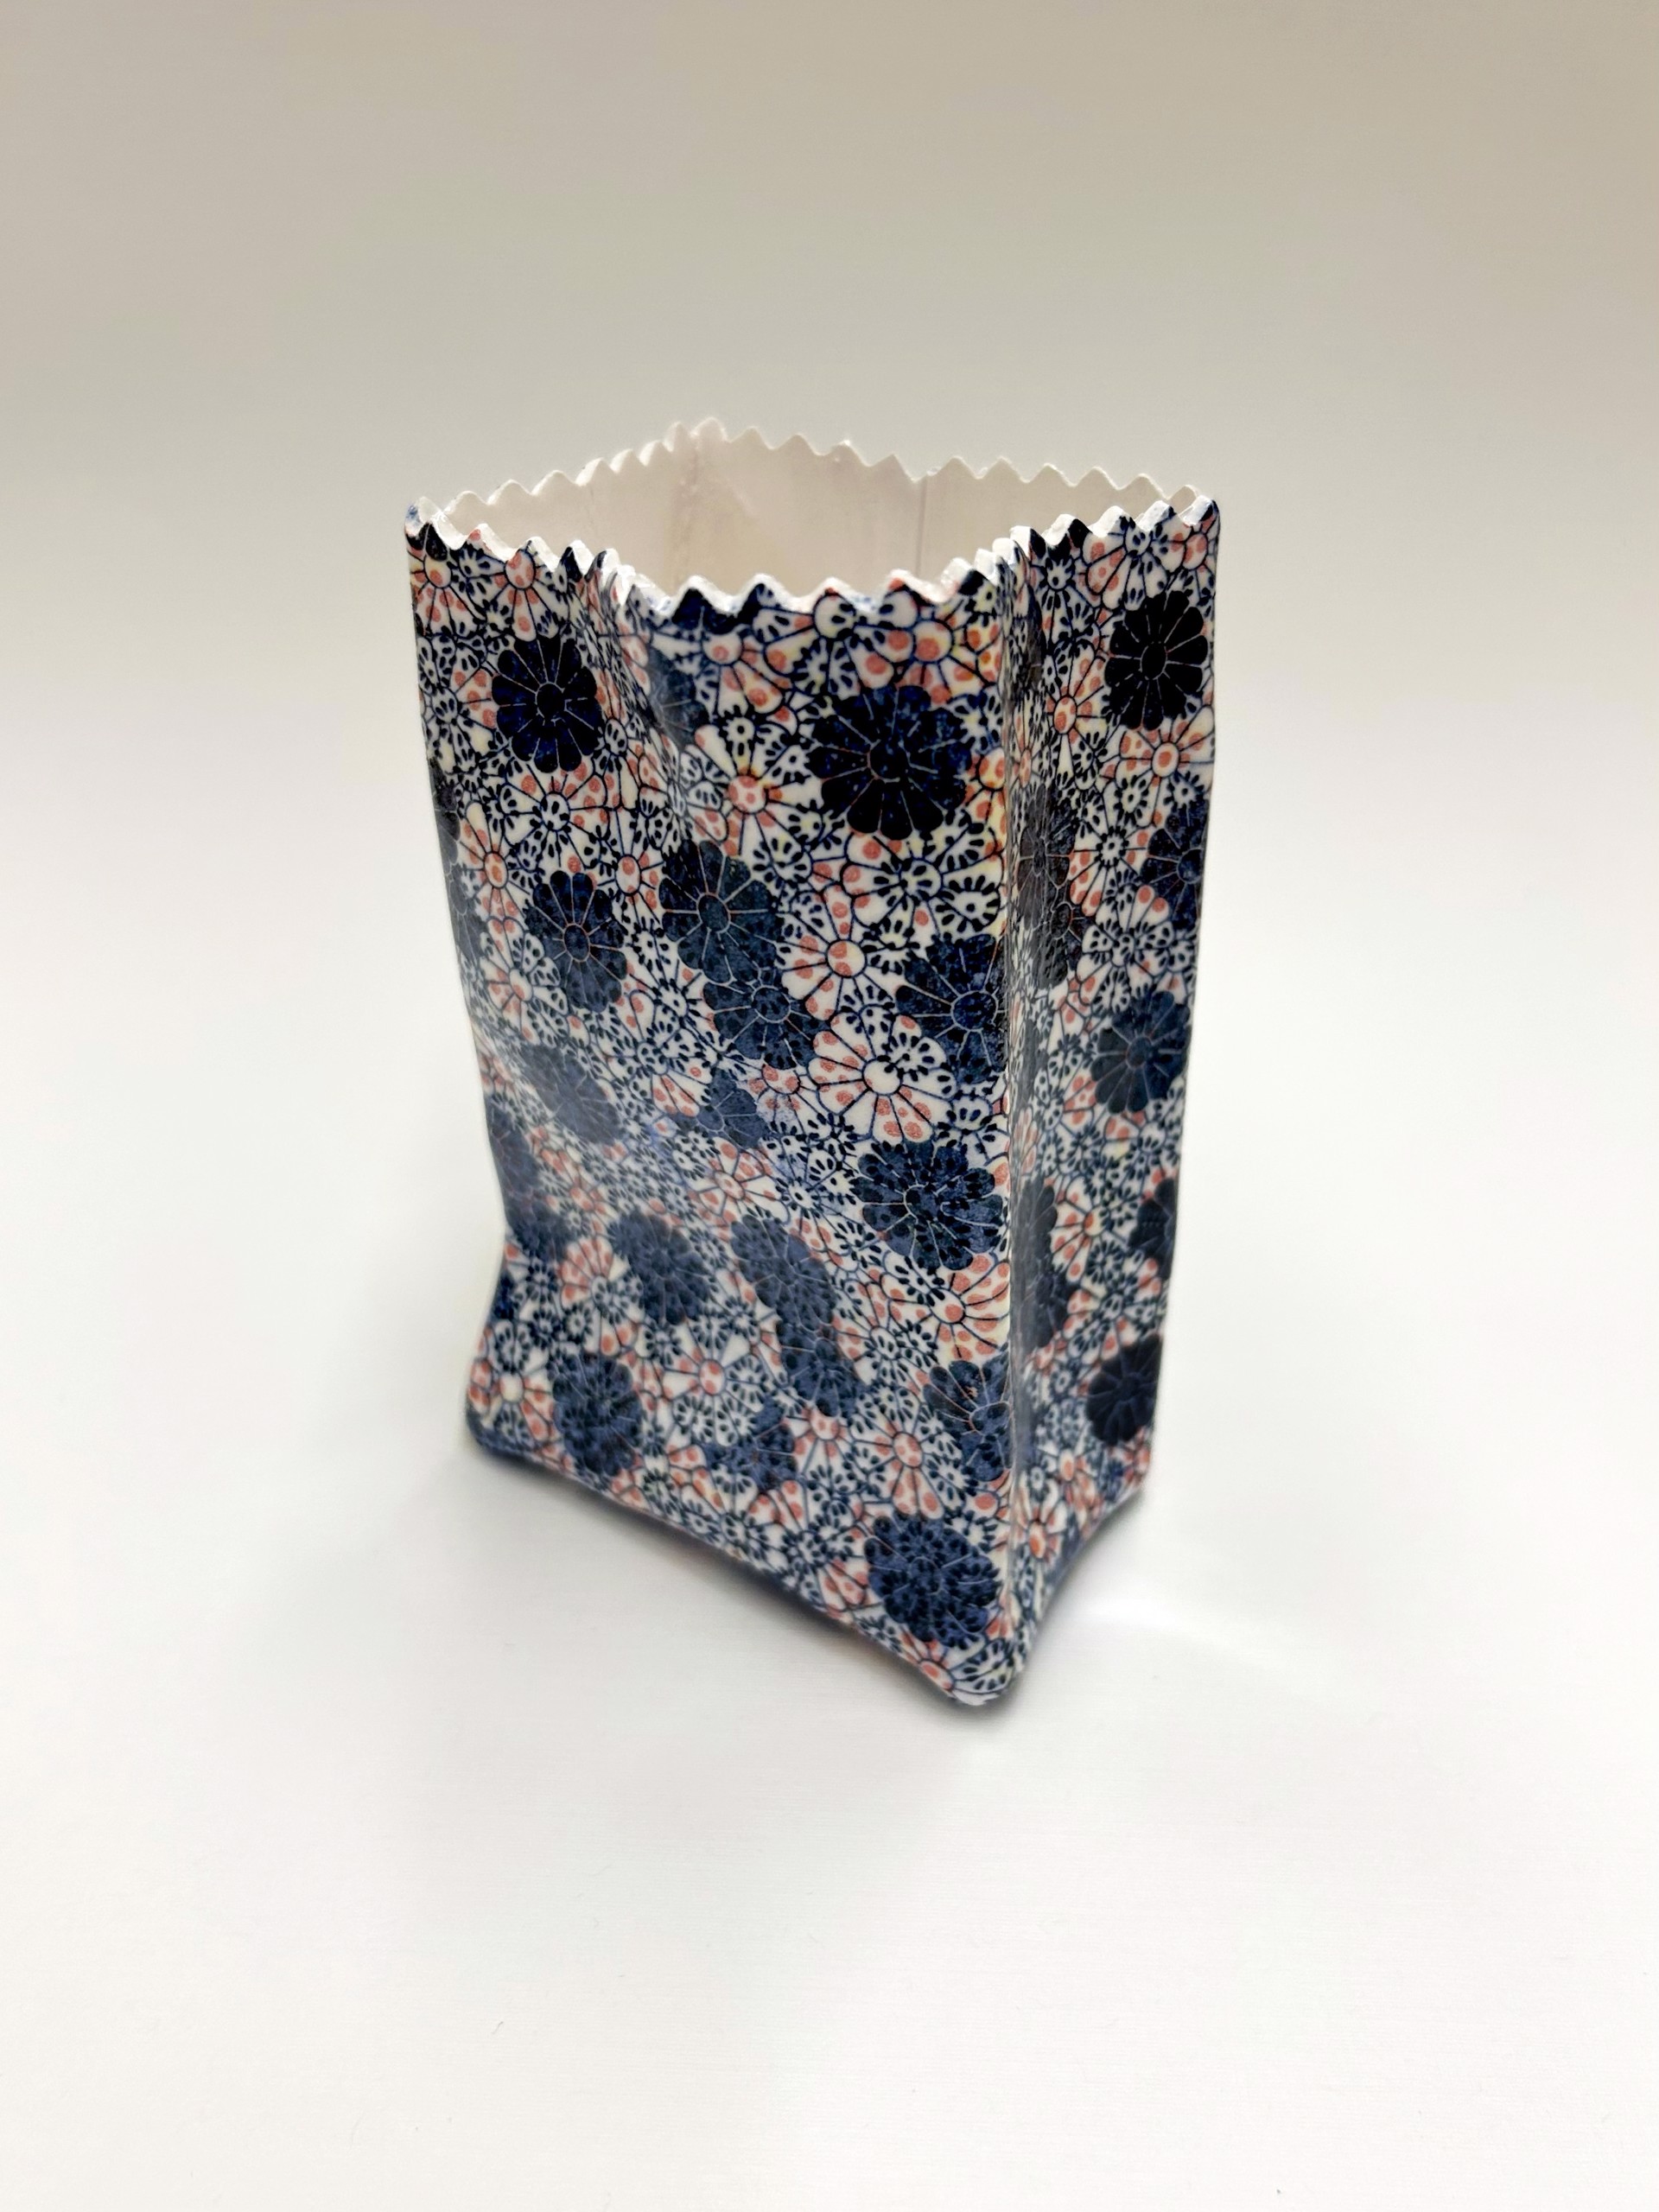 Bag with Blue and Red Flowers by Chandra Beadleston